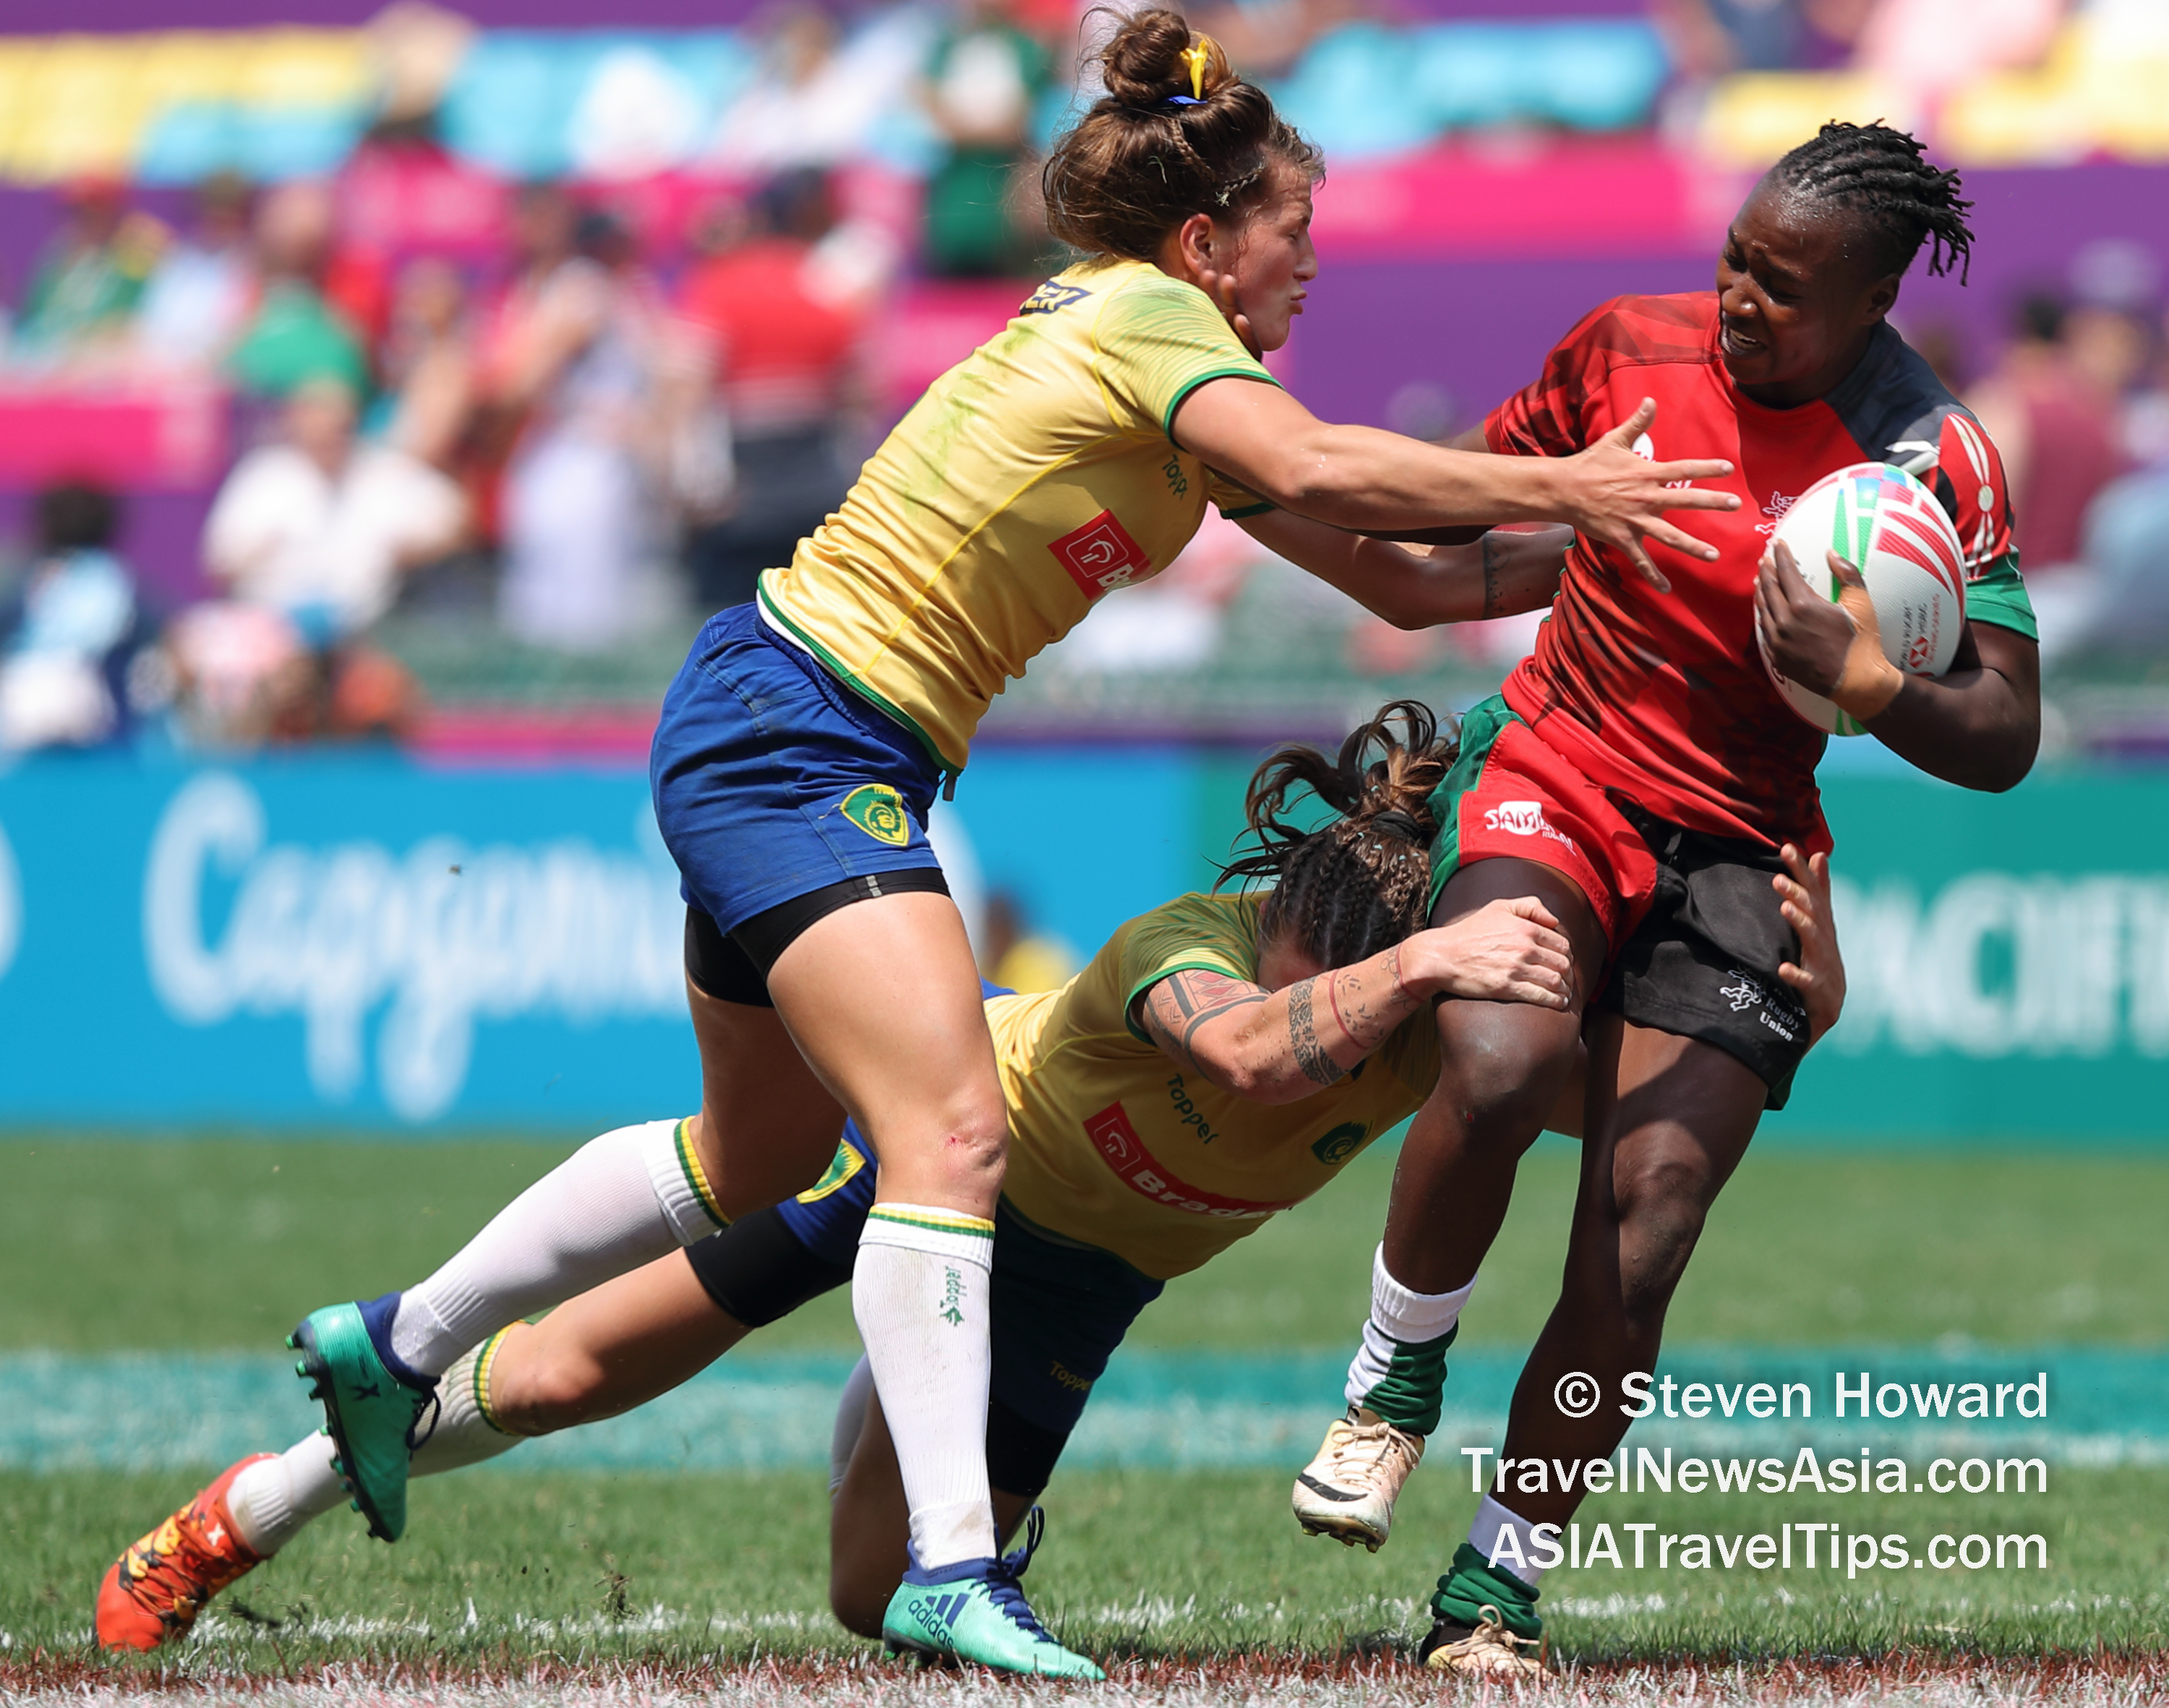 Brazil women in action against Kenya women at the Cathay Pacific / HSBC Hong Kong Sevens 2019. Brazil won the match 17-5. Picture by Steven Howard of TravelNewsAsia.com Click to enlarge.